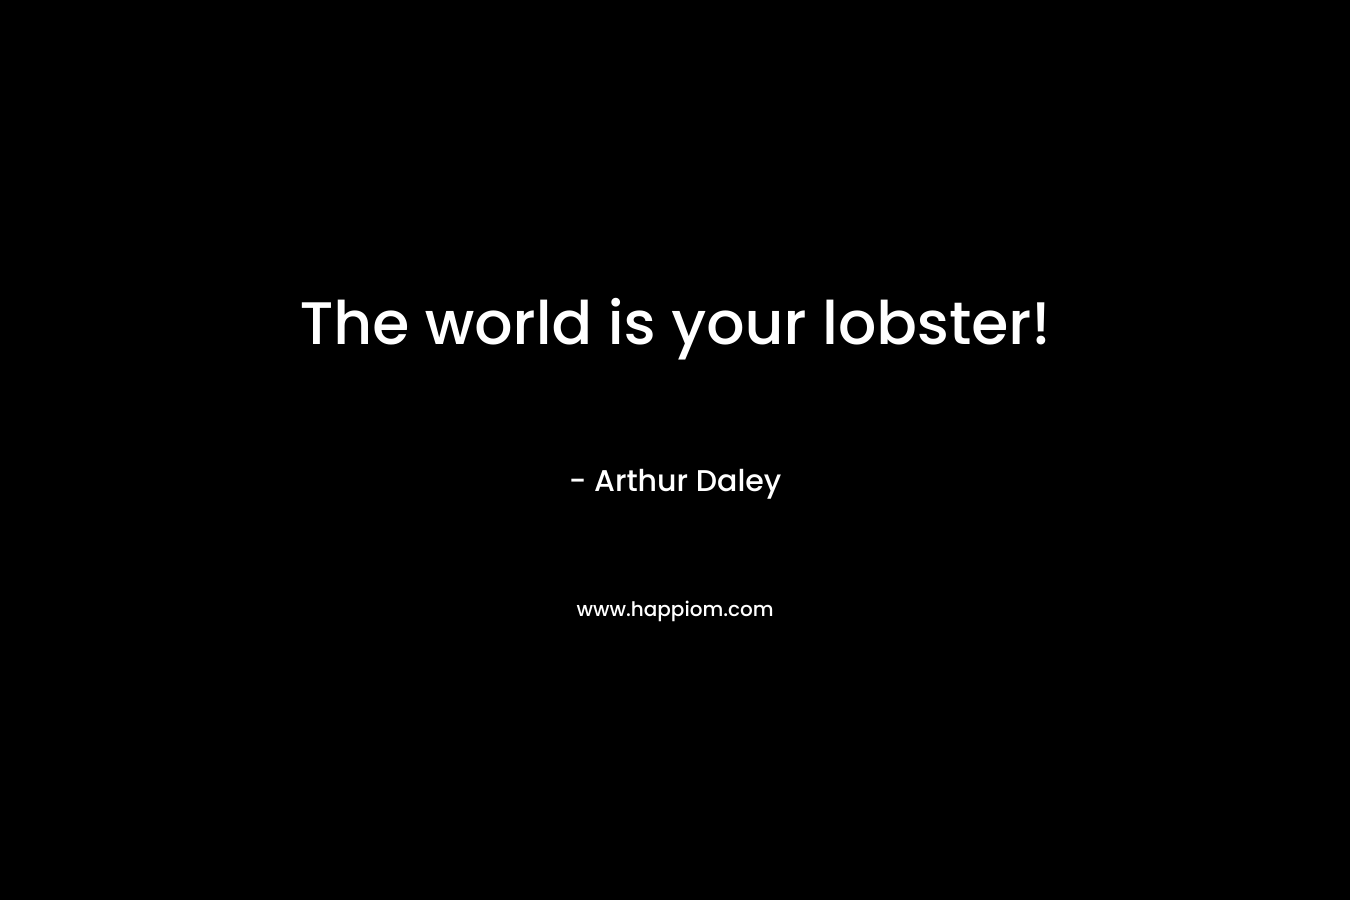 The world is your lobster!